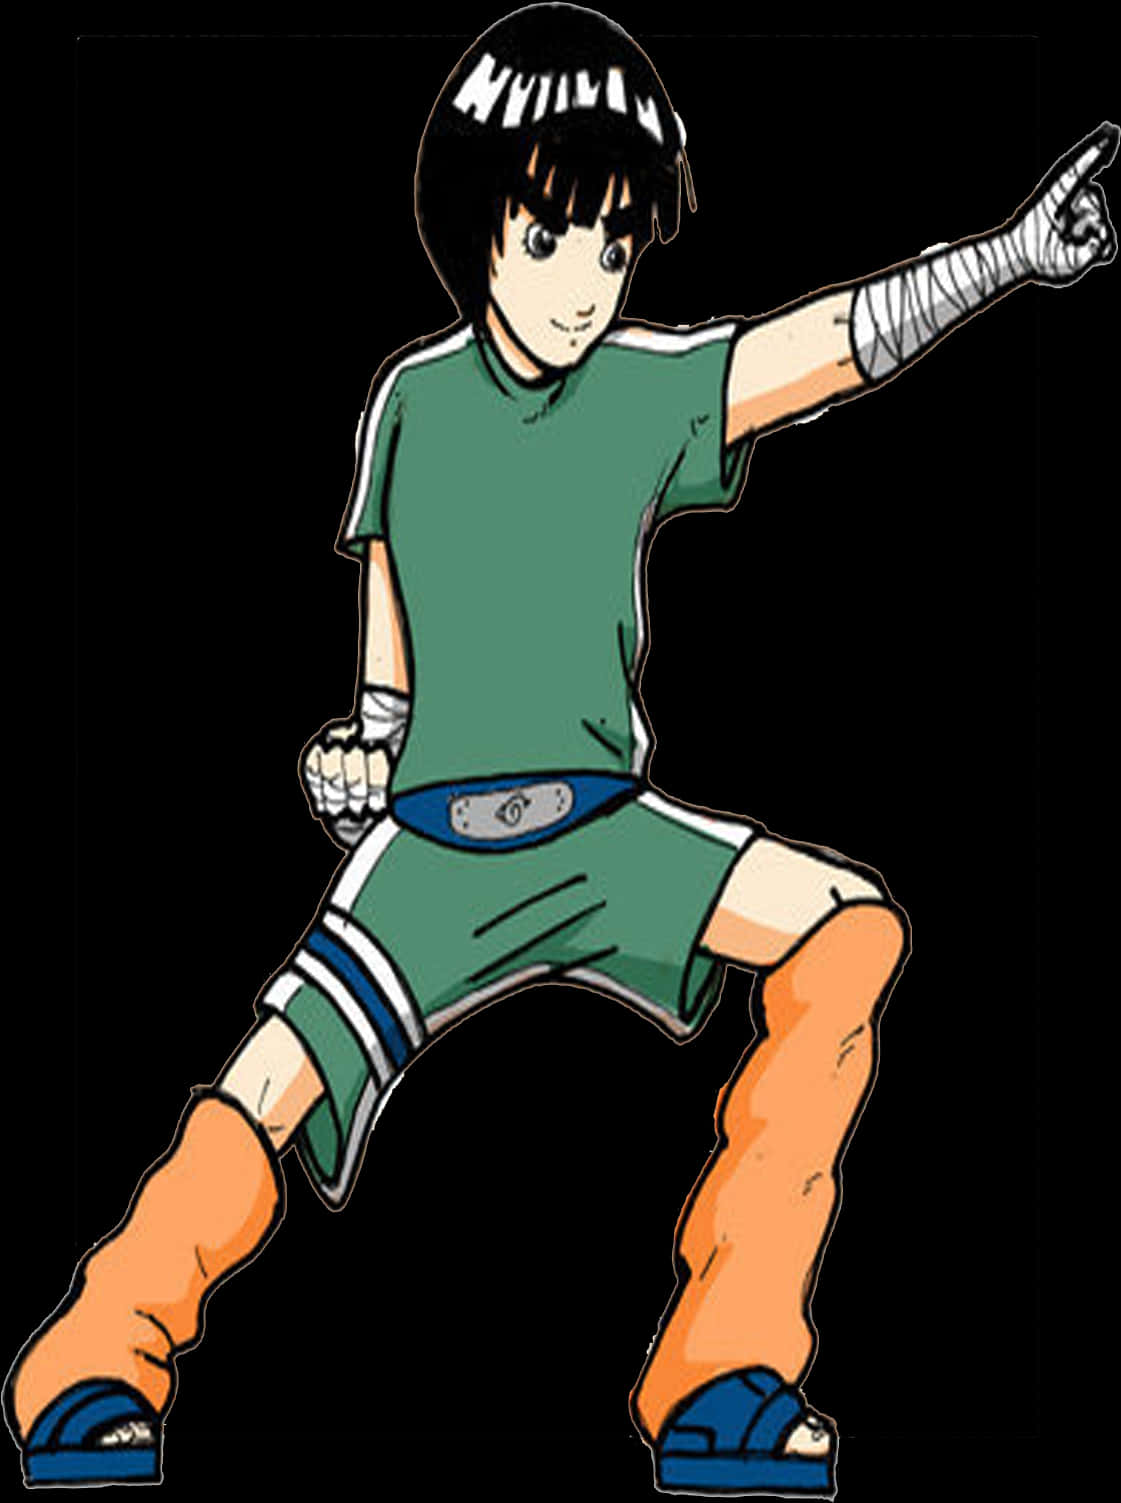 Rock Lee Action Pose